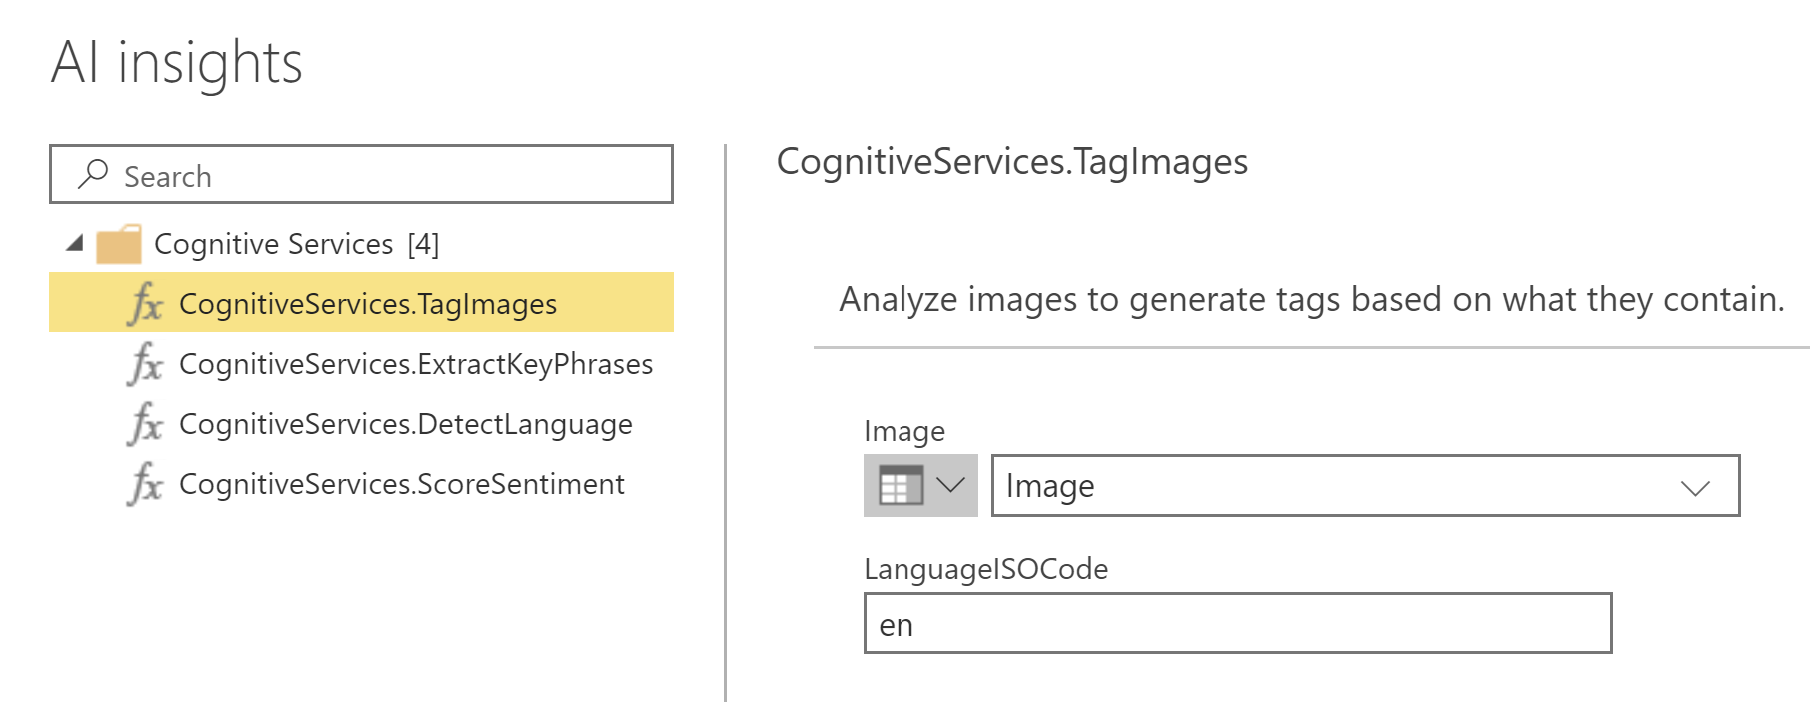 Power BI AI Insights - Tag Images